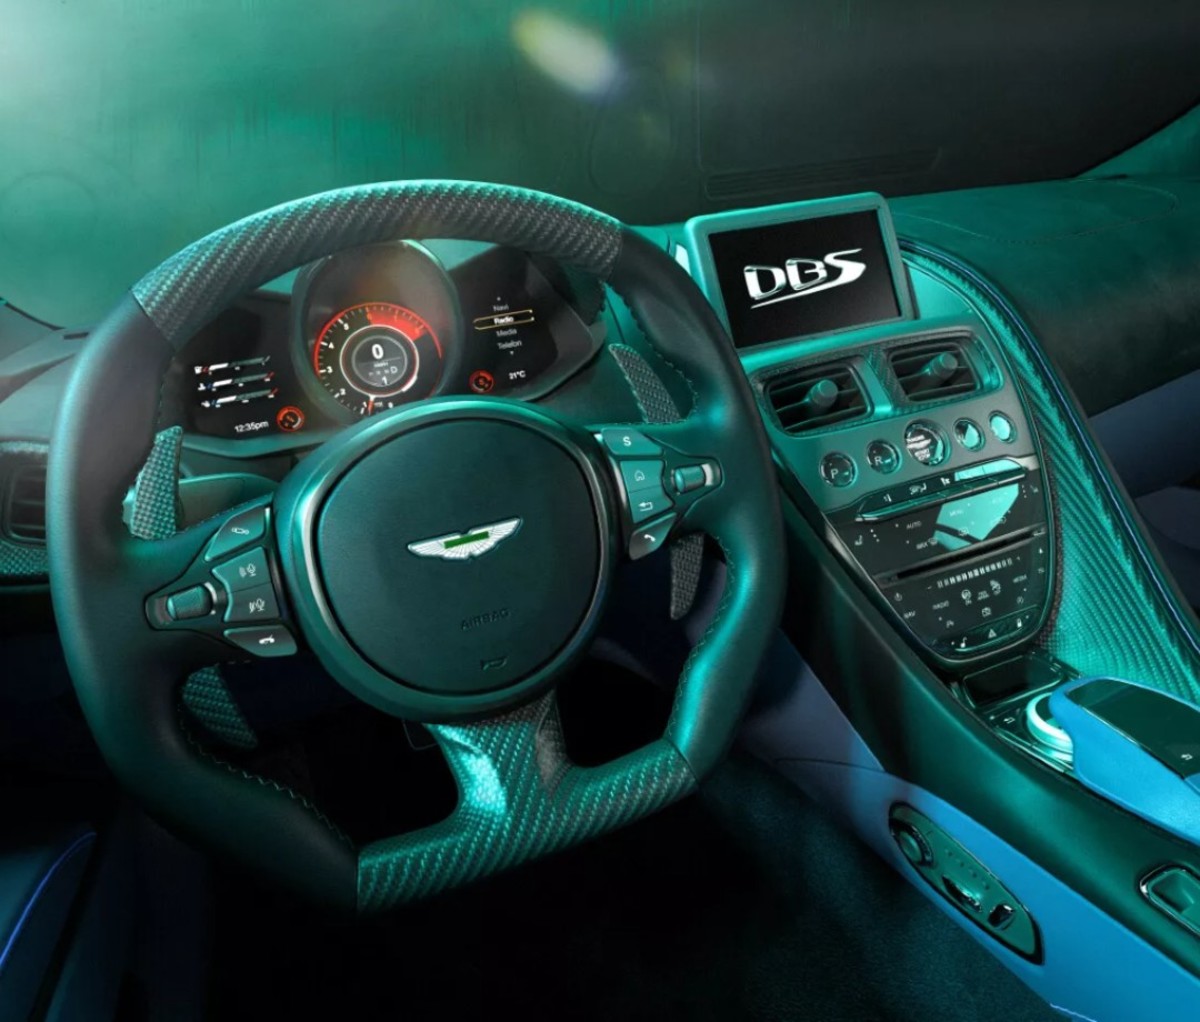 Interior detail of the Aston Martin DBS 770 Ultimate steering wheel and information screen